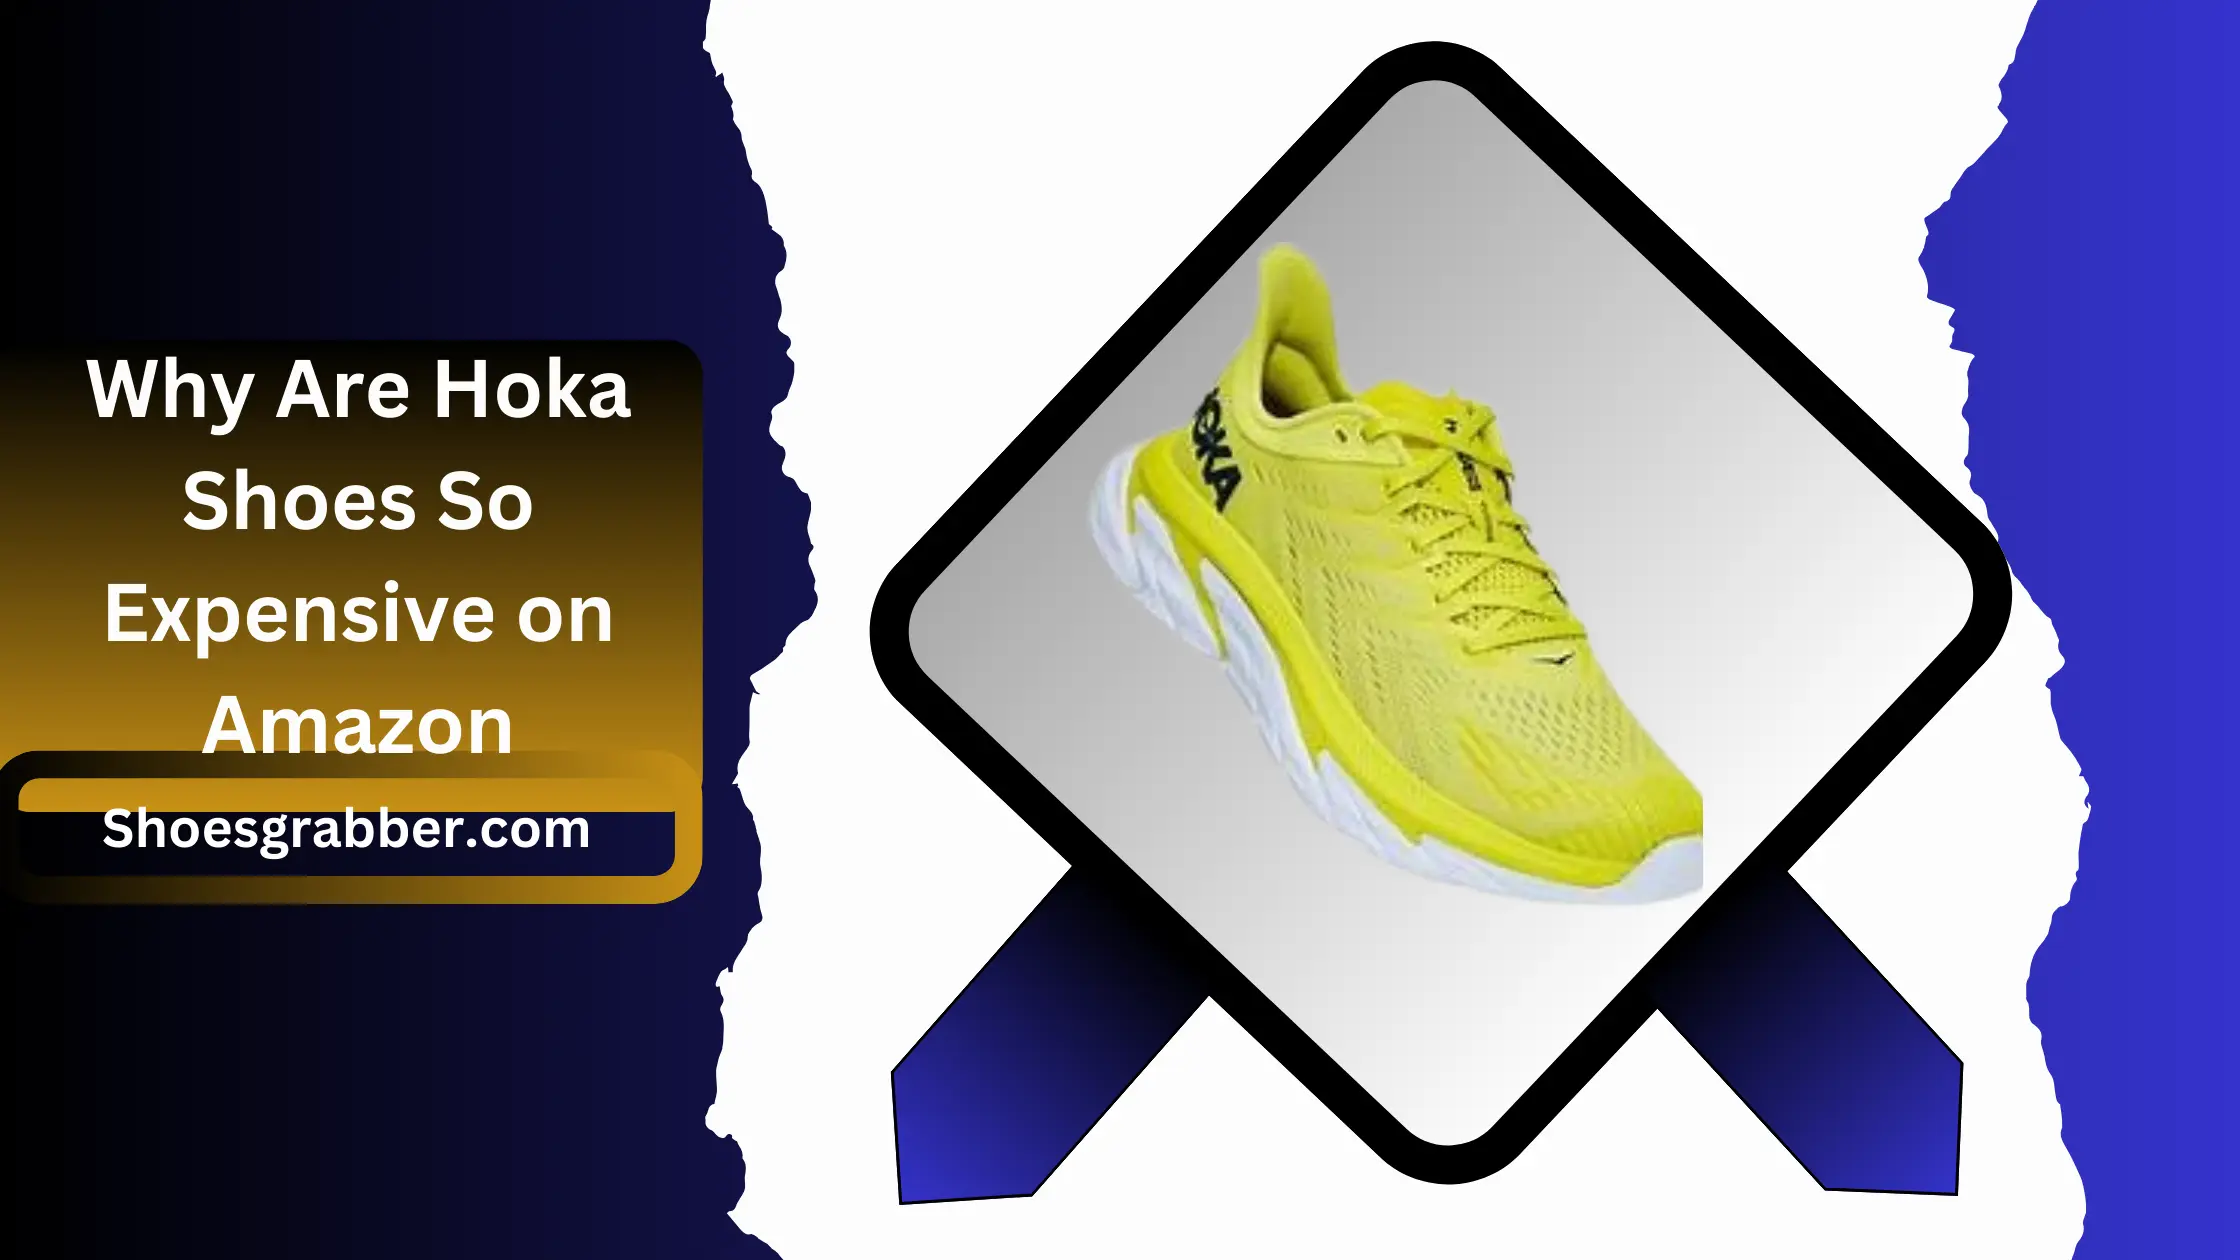 Why Are Hoka Shoes So Expensive on Amazon - Uncovering the High Cost